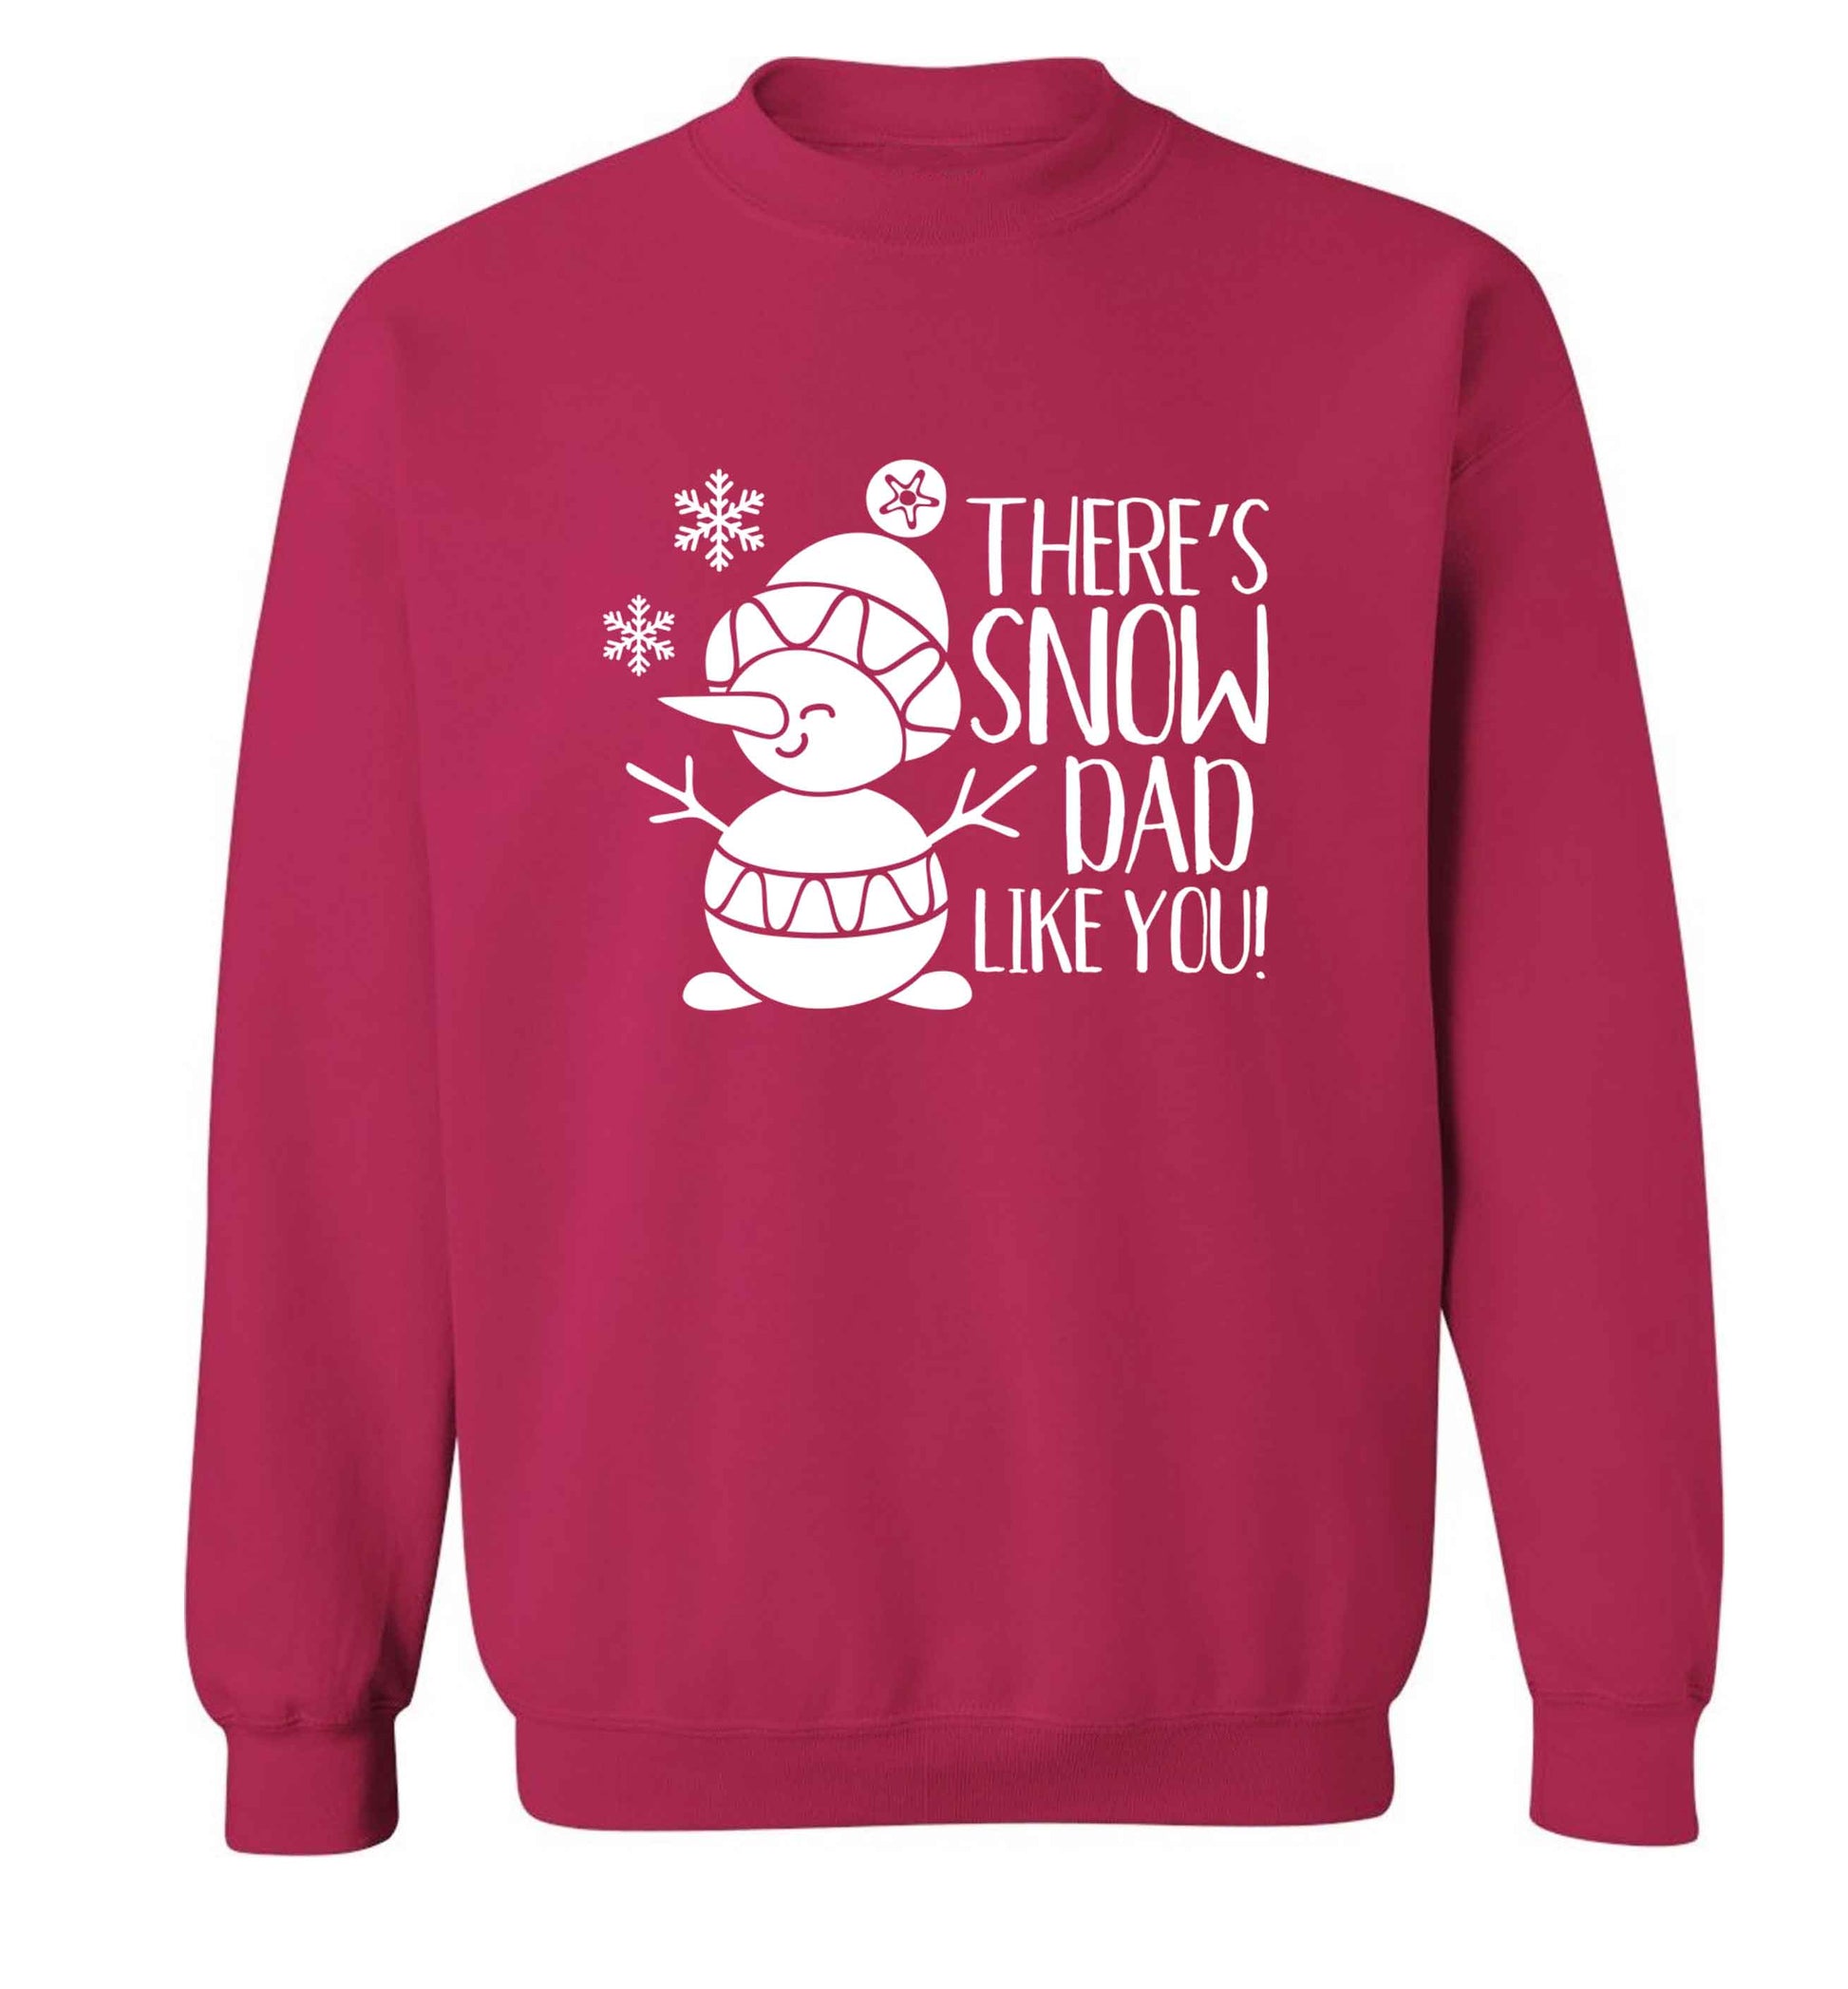 There's snow dad like you adult's unisex pink sweater 2XL